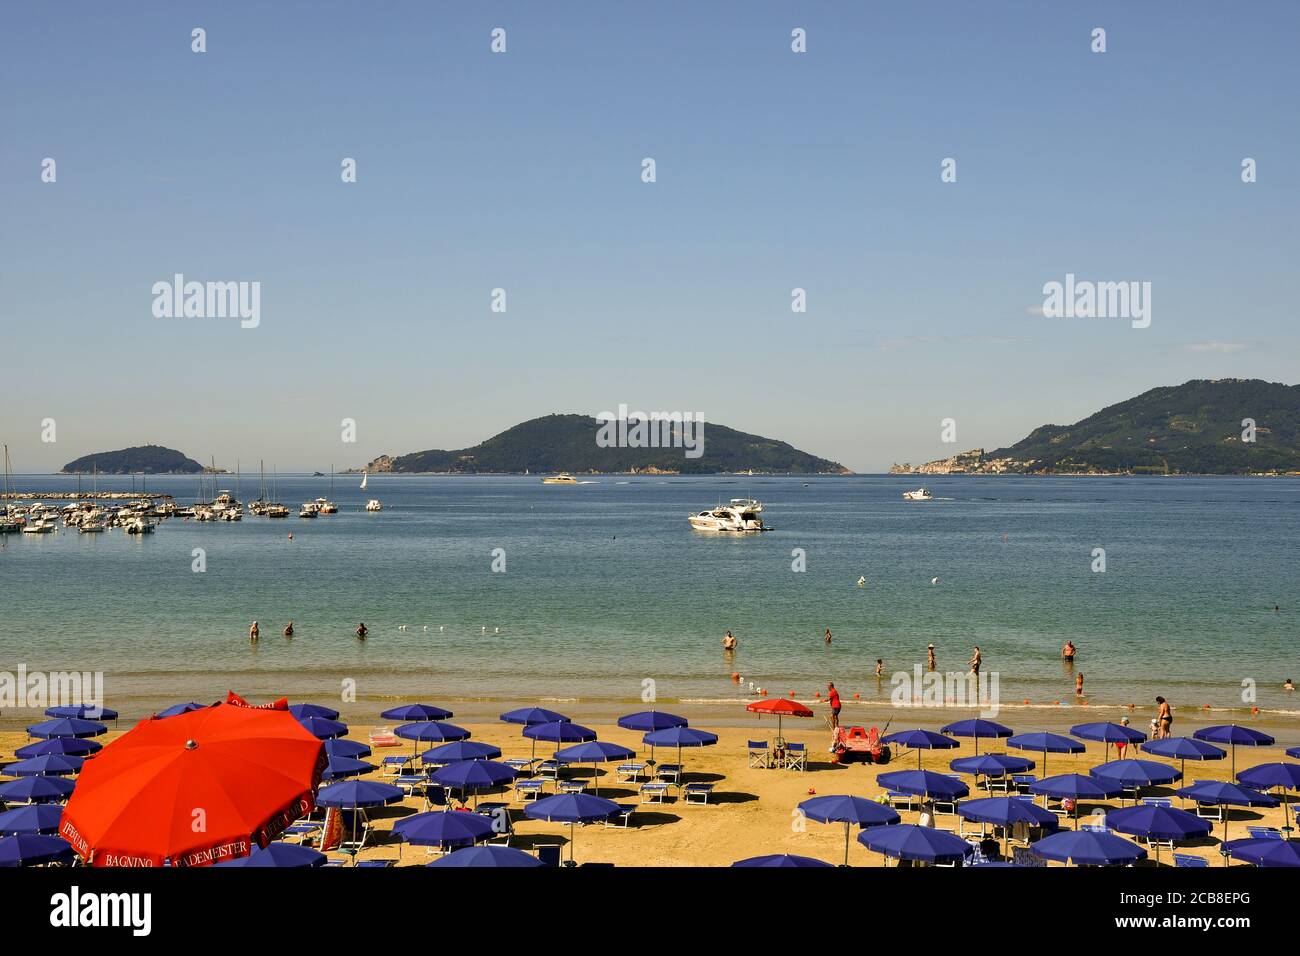 Scenic view of the Gulf of the Poets from a beach with the islands of Tino and Palmaria and the promontory of Porto Venere, Lerici, Liguria, Italy Stock Photo